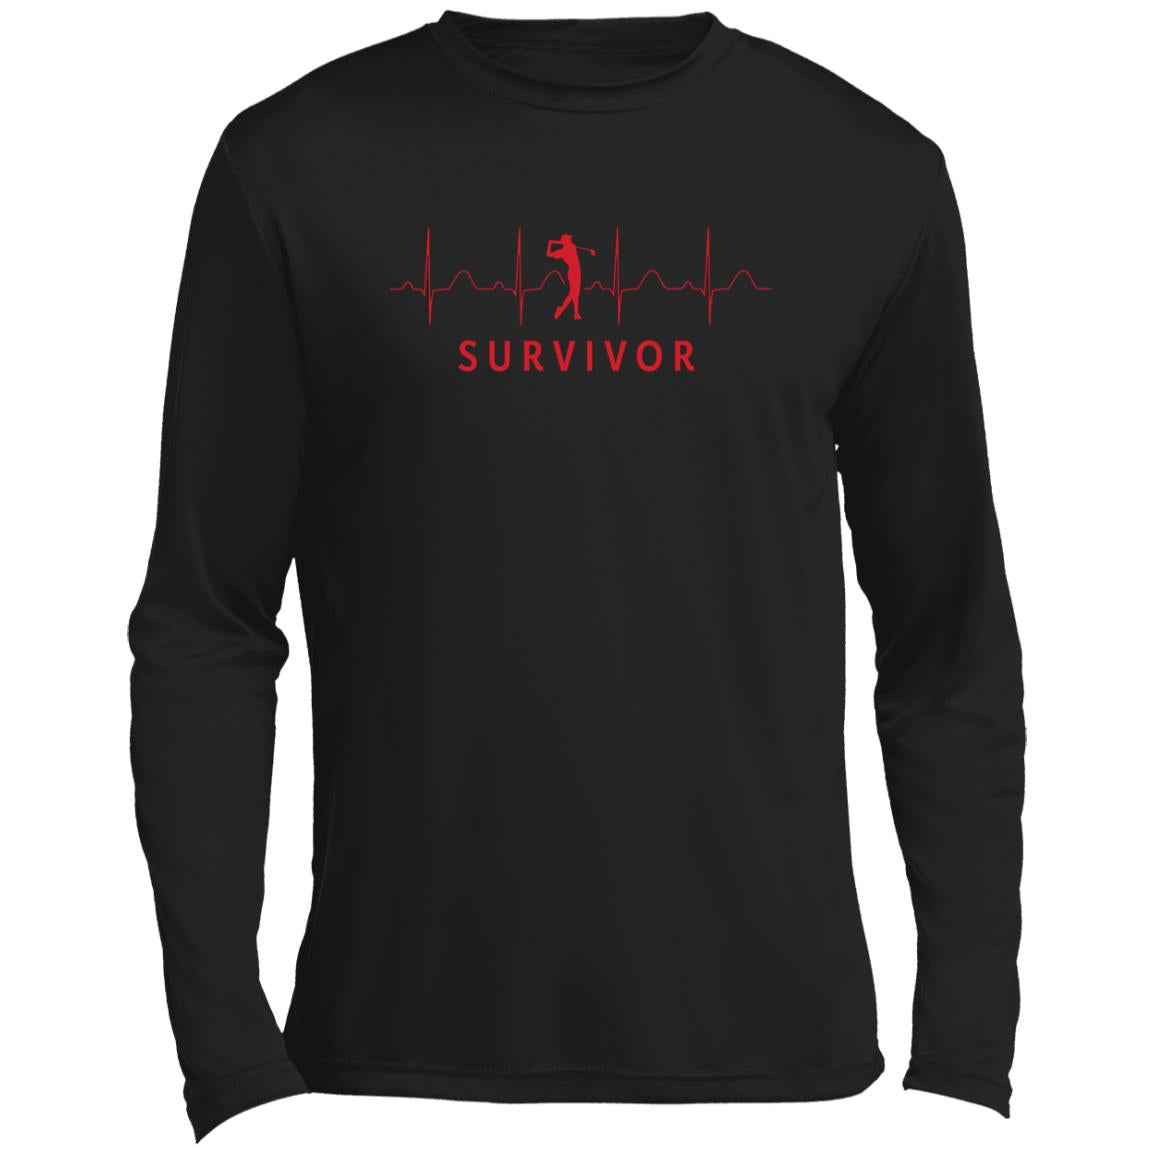 Black long-sleeve tee with SURVIVOR text along with a golfer icon with EKG lines behind